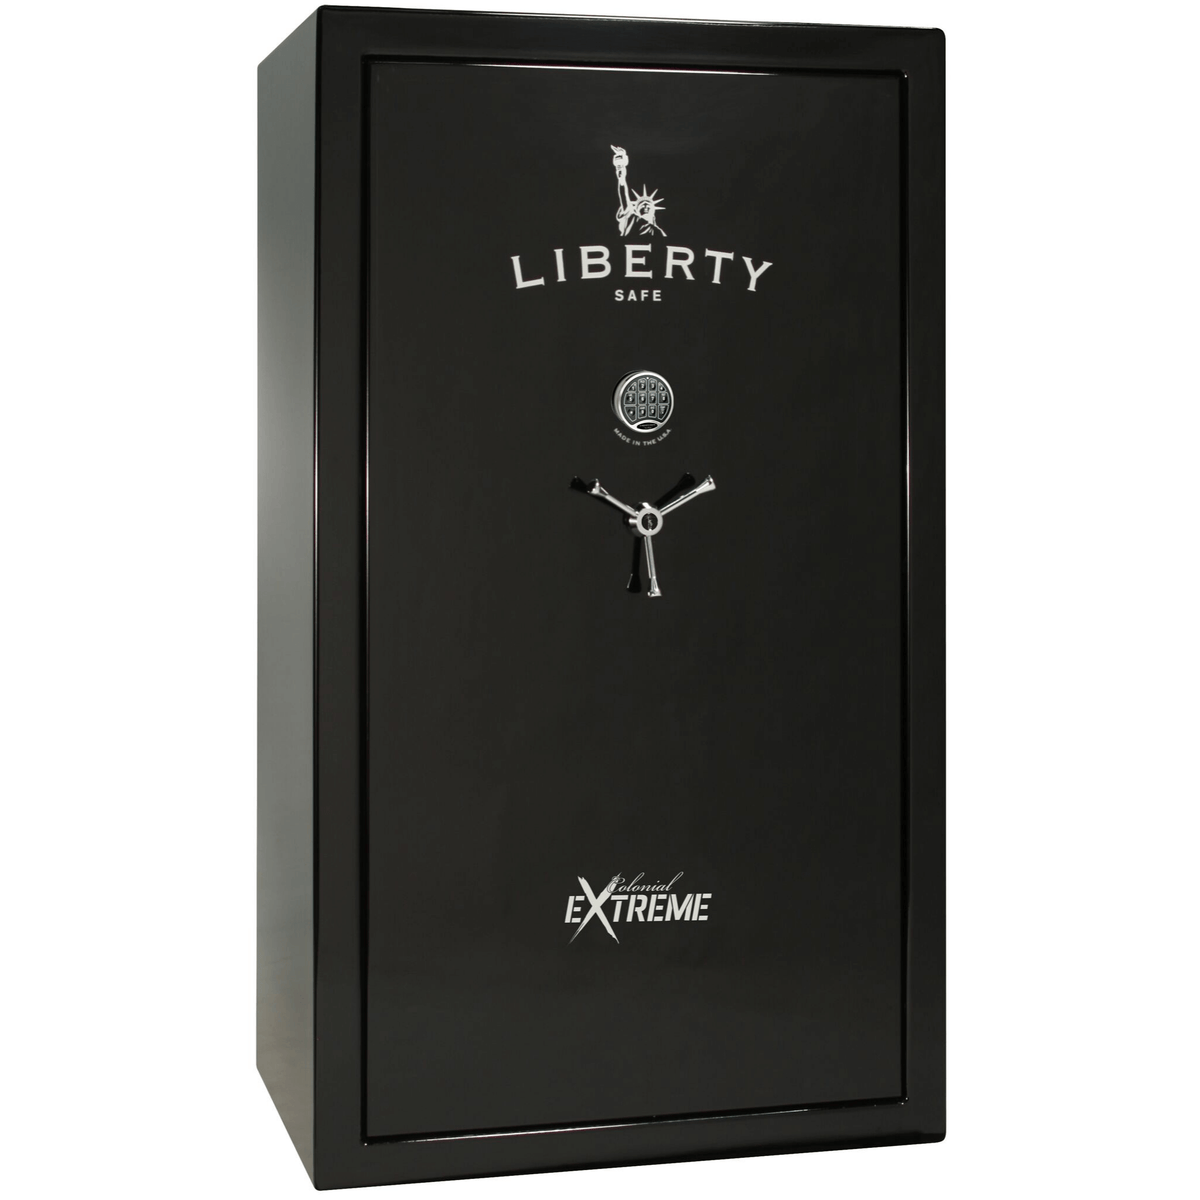 Liberty Colonial 50 Extreme Safe in Black Gloss with Chrome Electronic Lock.